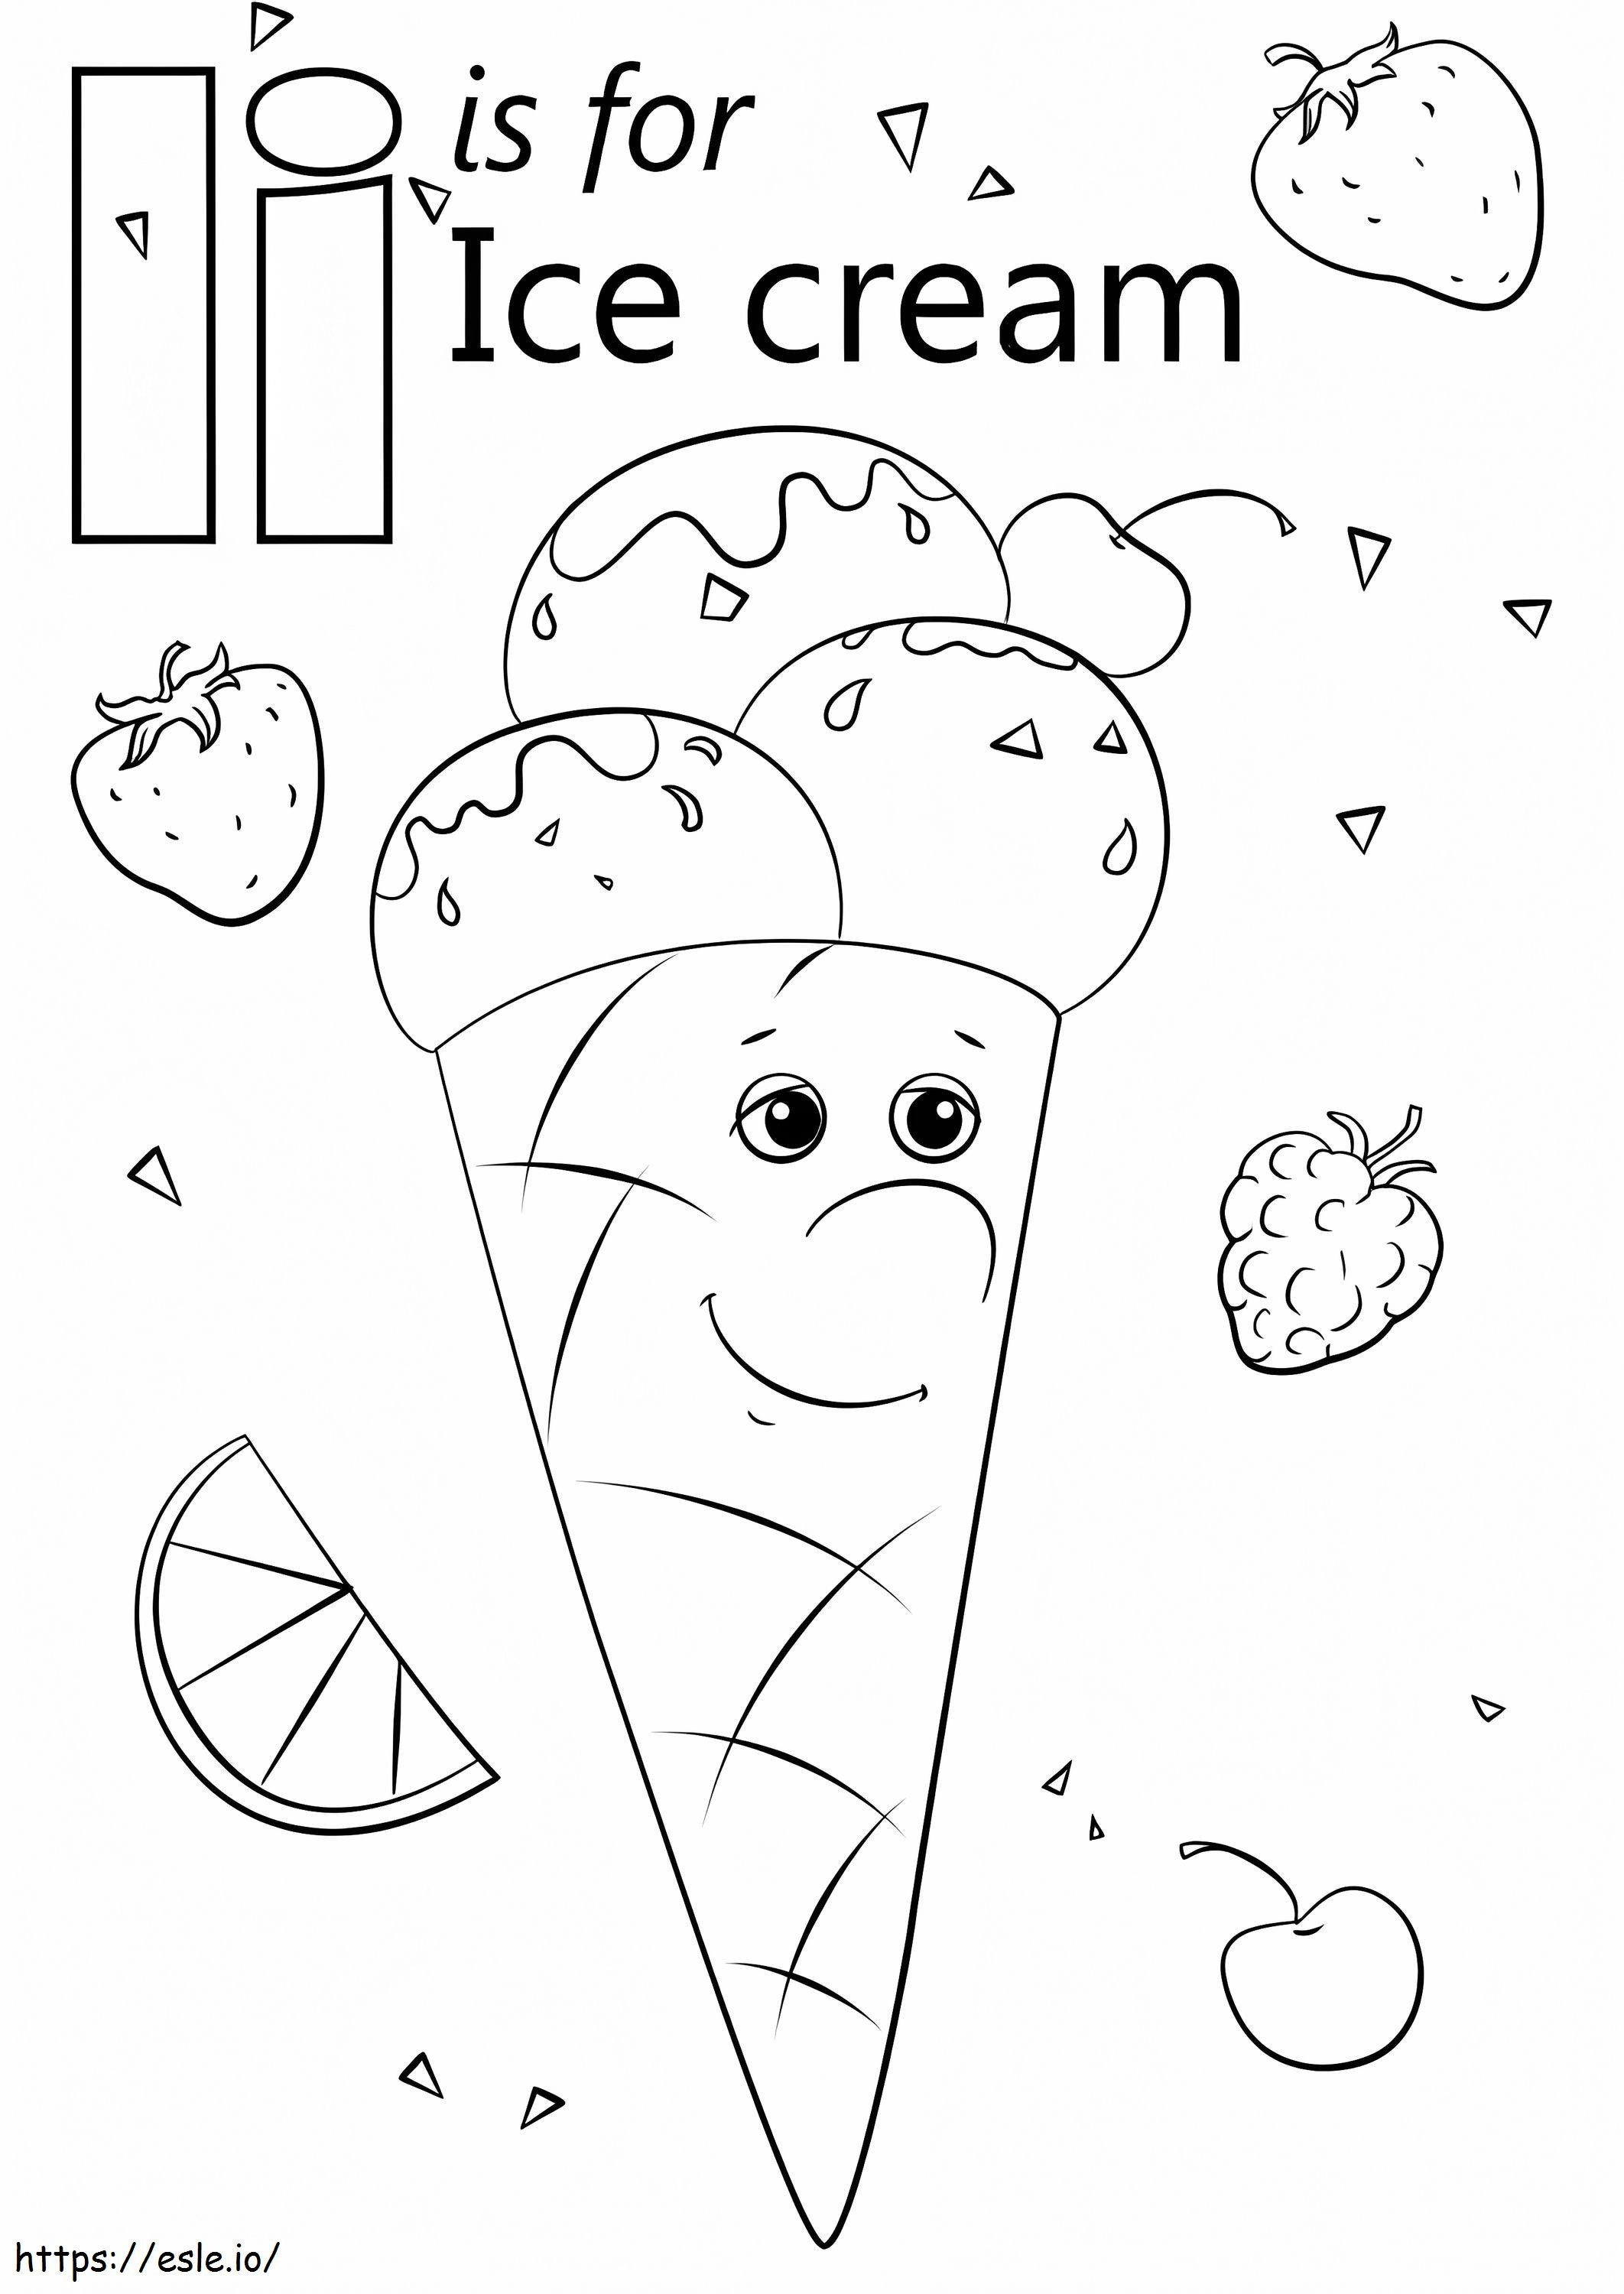 Ice Cream Letter I coloring page